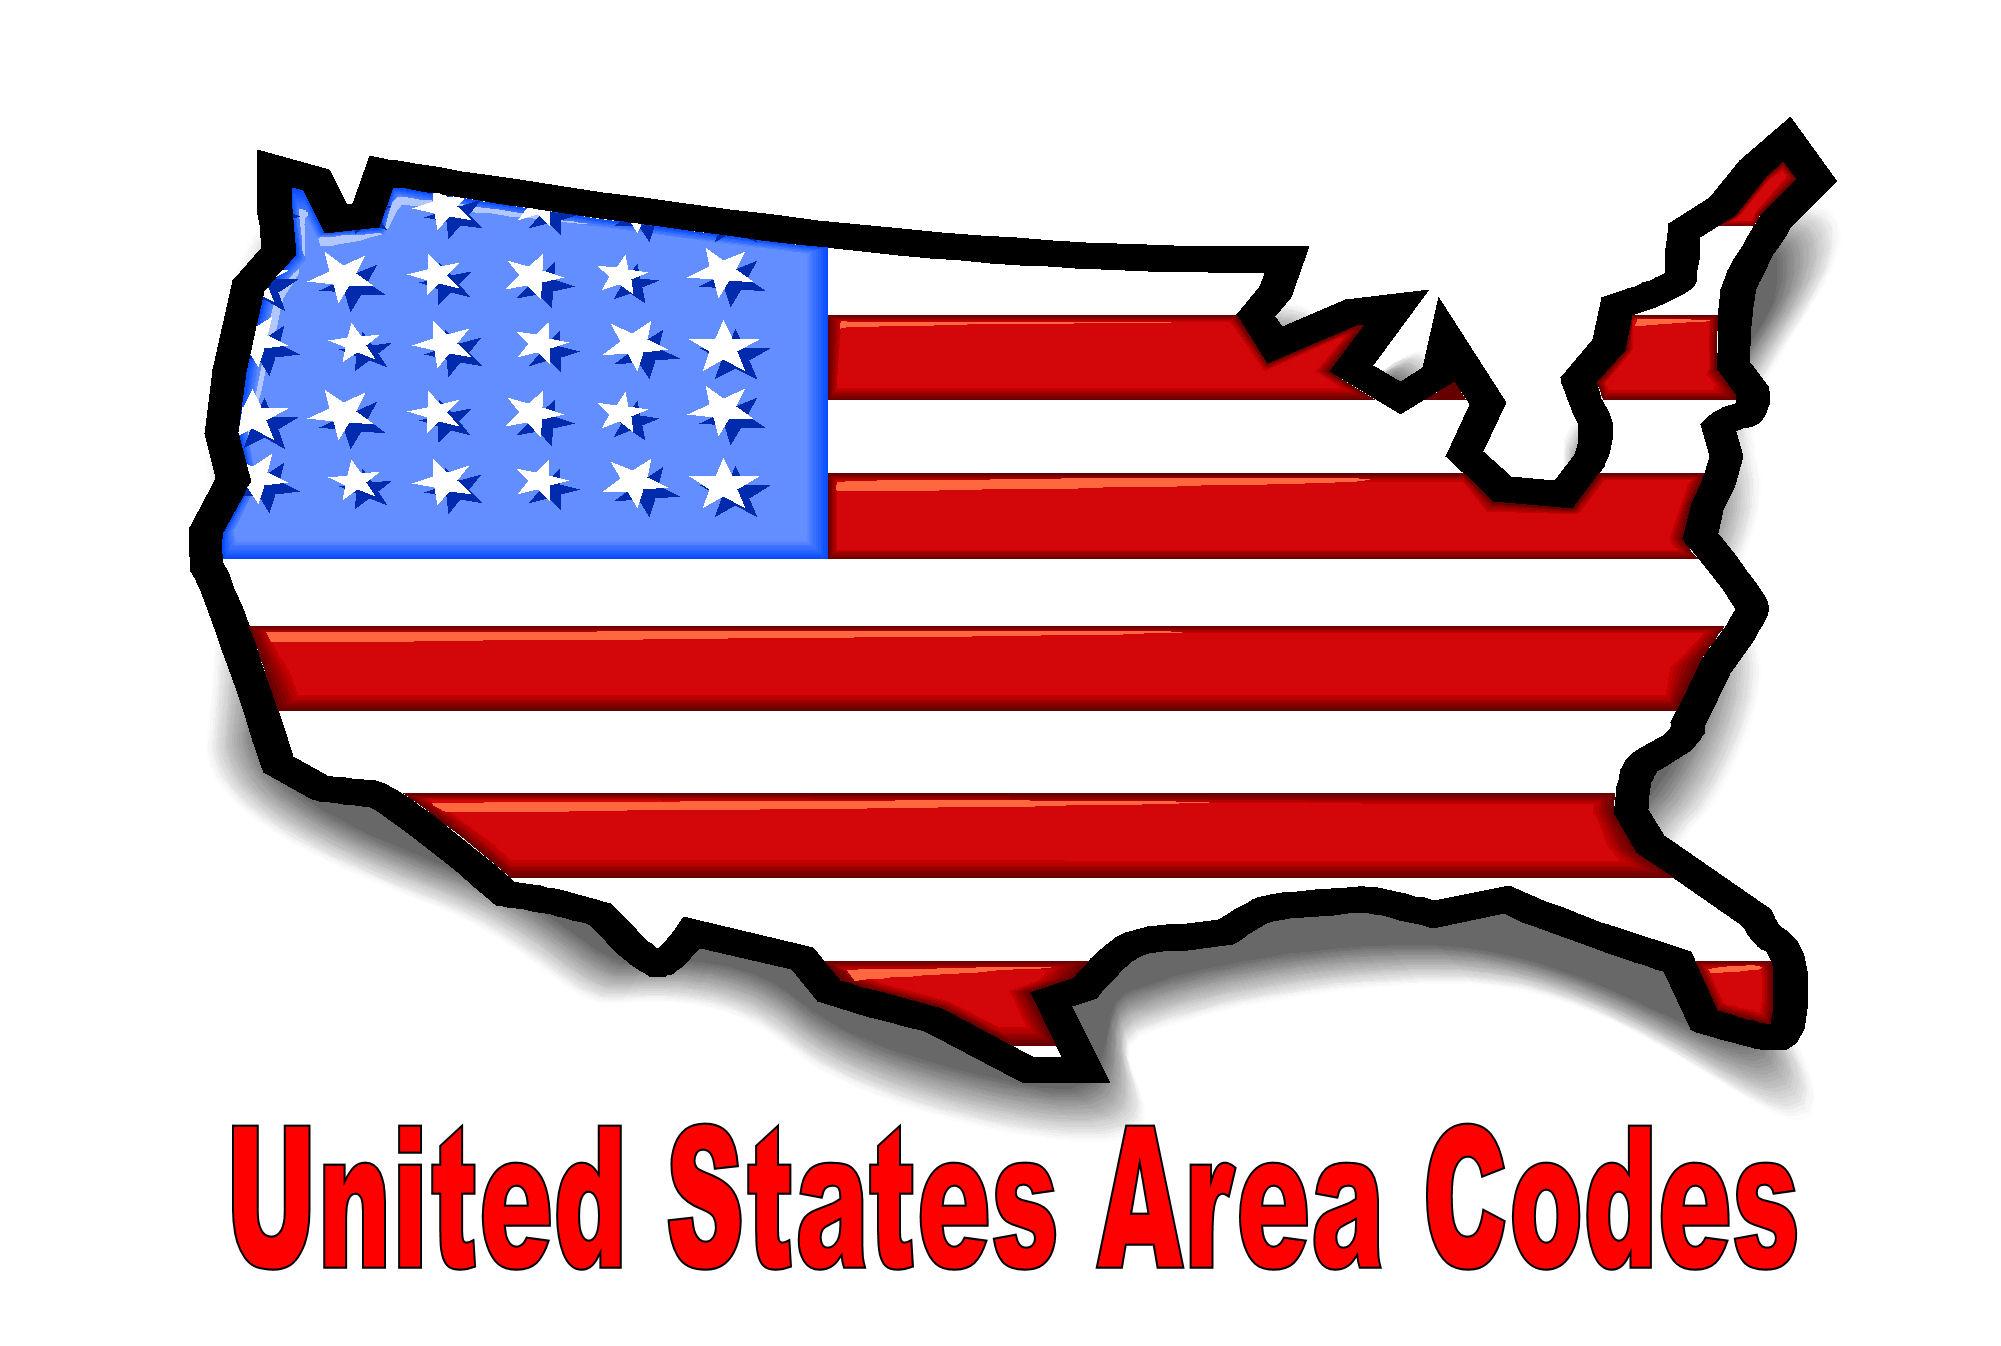 Printable area code listing by State and Number from UnitedStates-AreaCodes.com